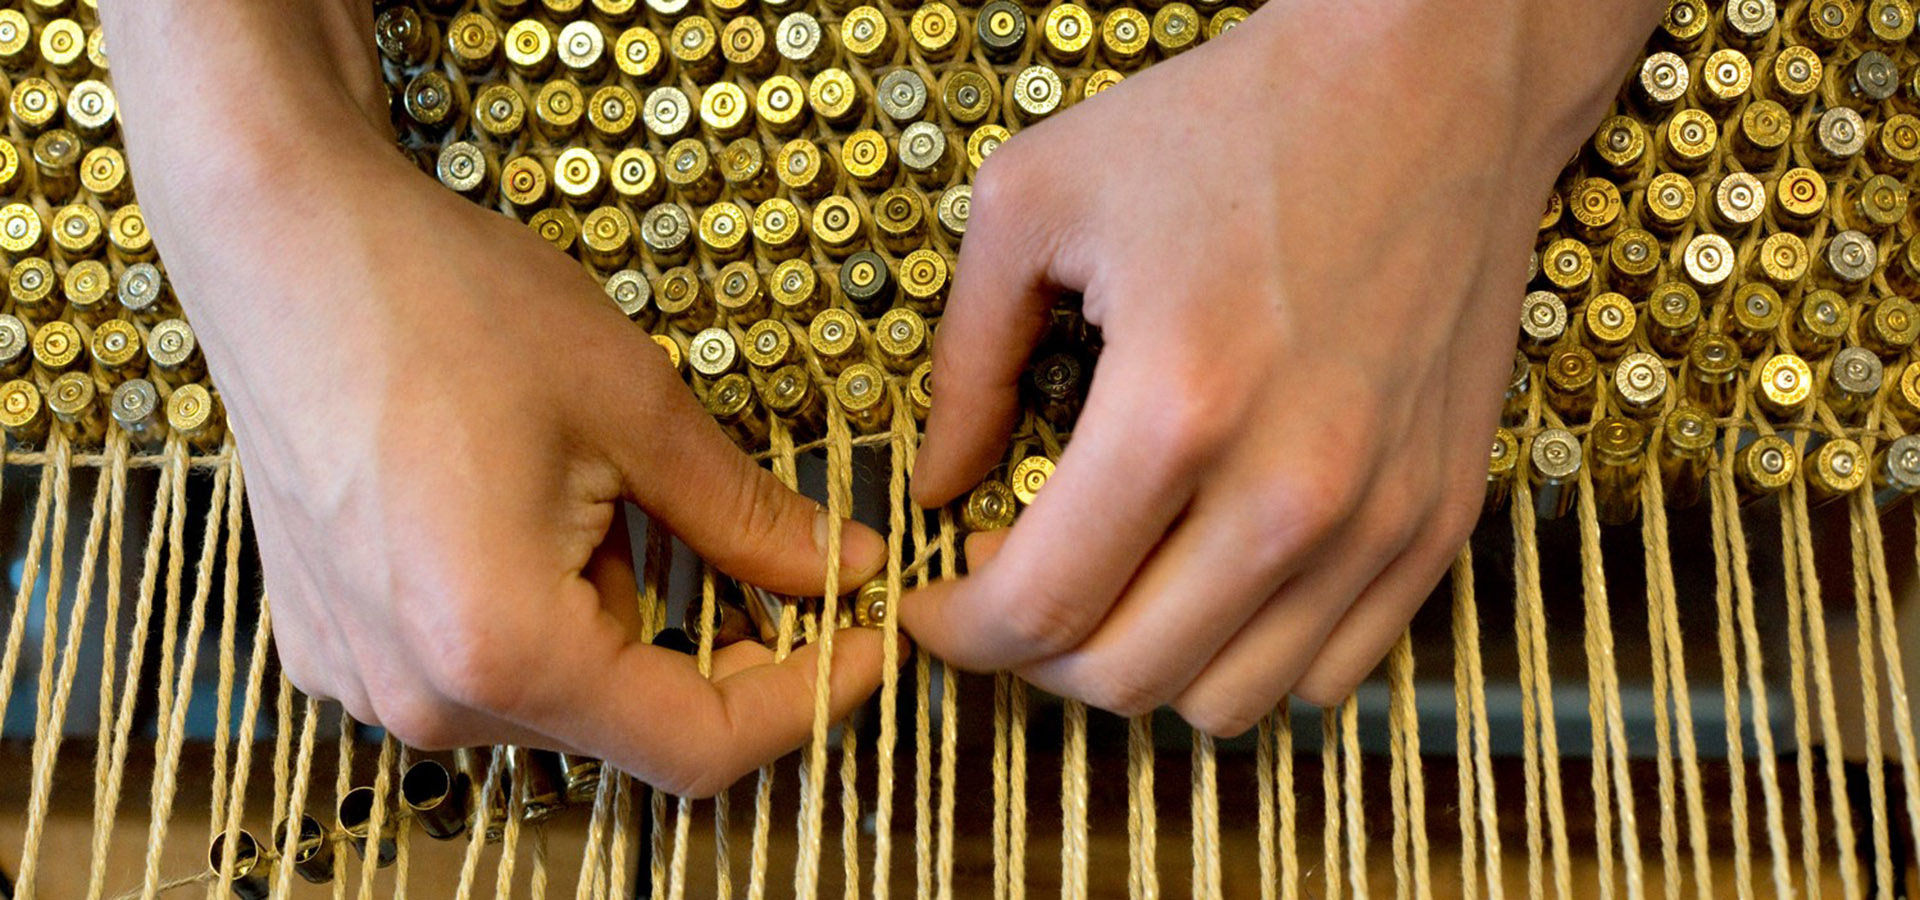 photo of hands weaving gold bullets on string into a rug